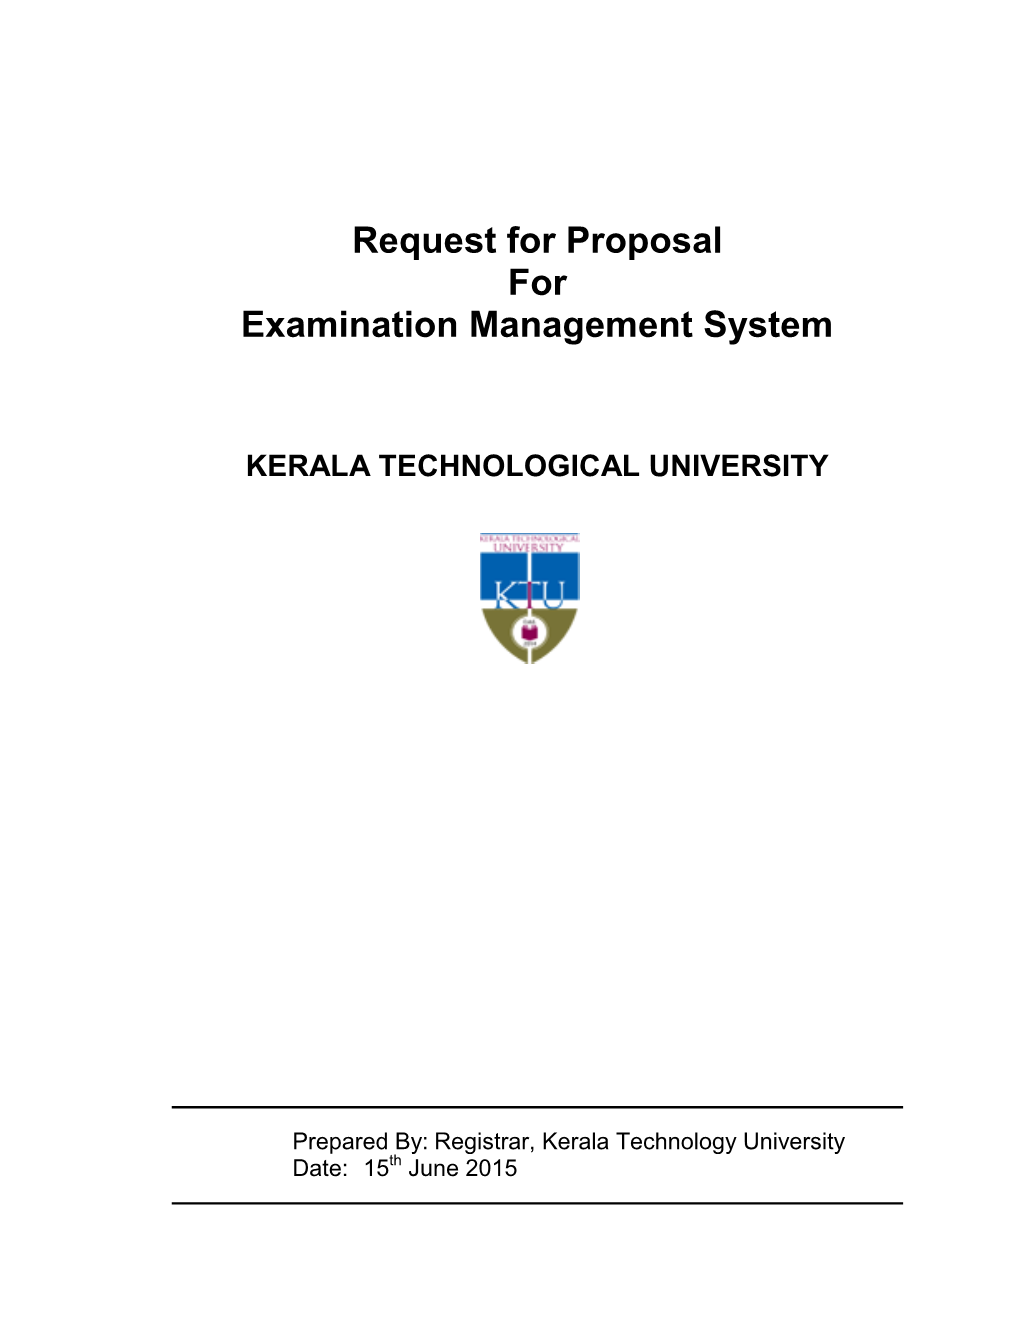 Request for Proposal for Examination Management System